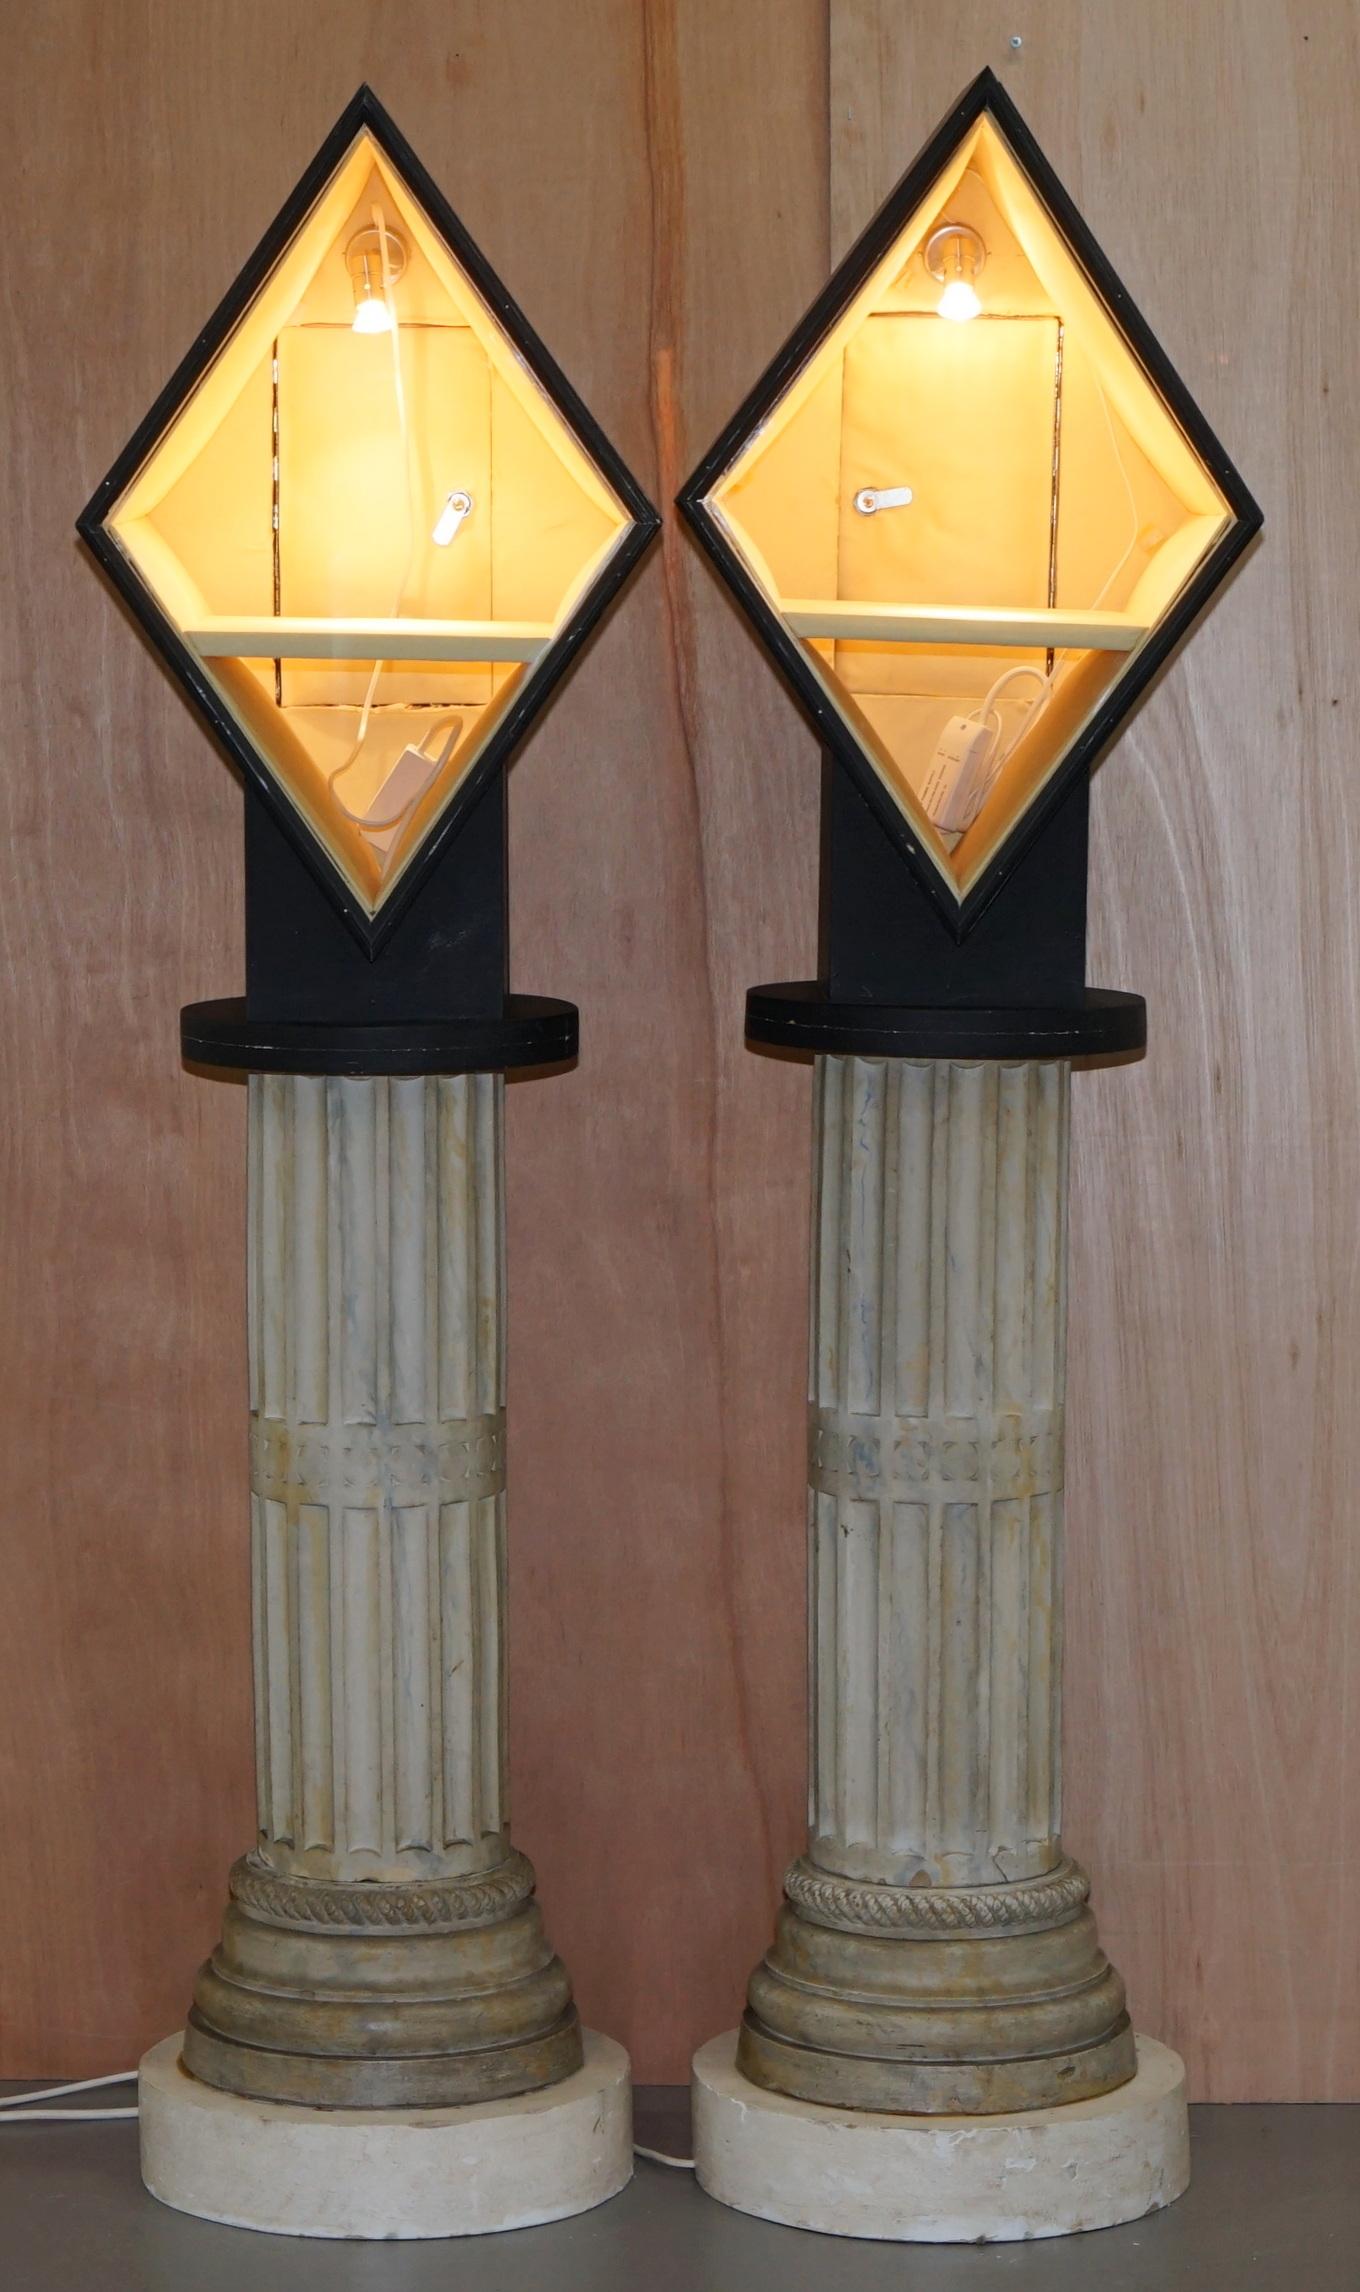 We are delighted to offer for sale this stunning of 170cm tall display pillars with lights on Corinthian pillar bases

A very good looking and decorative pair, the cabinets have been PAT tested and rewired as needed, I have a pack of new bulbs